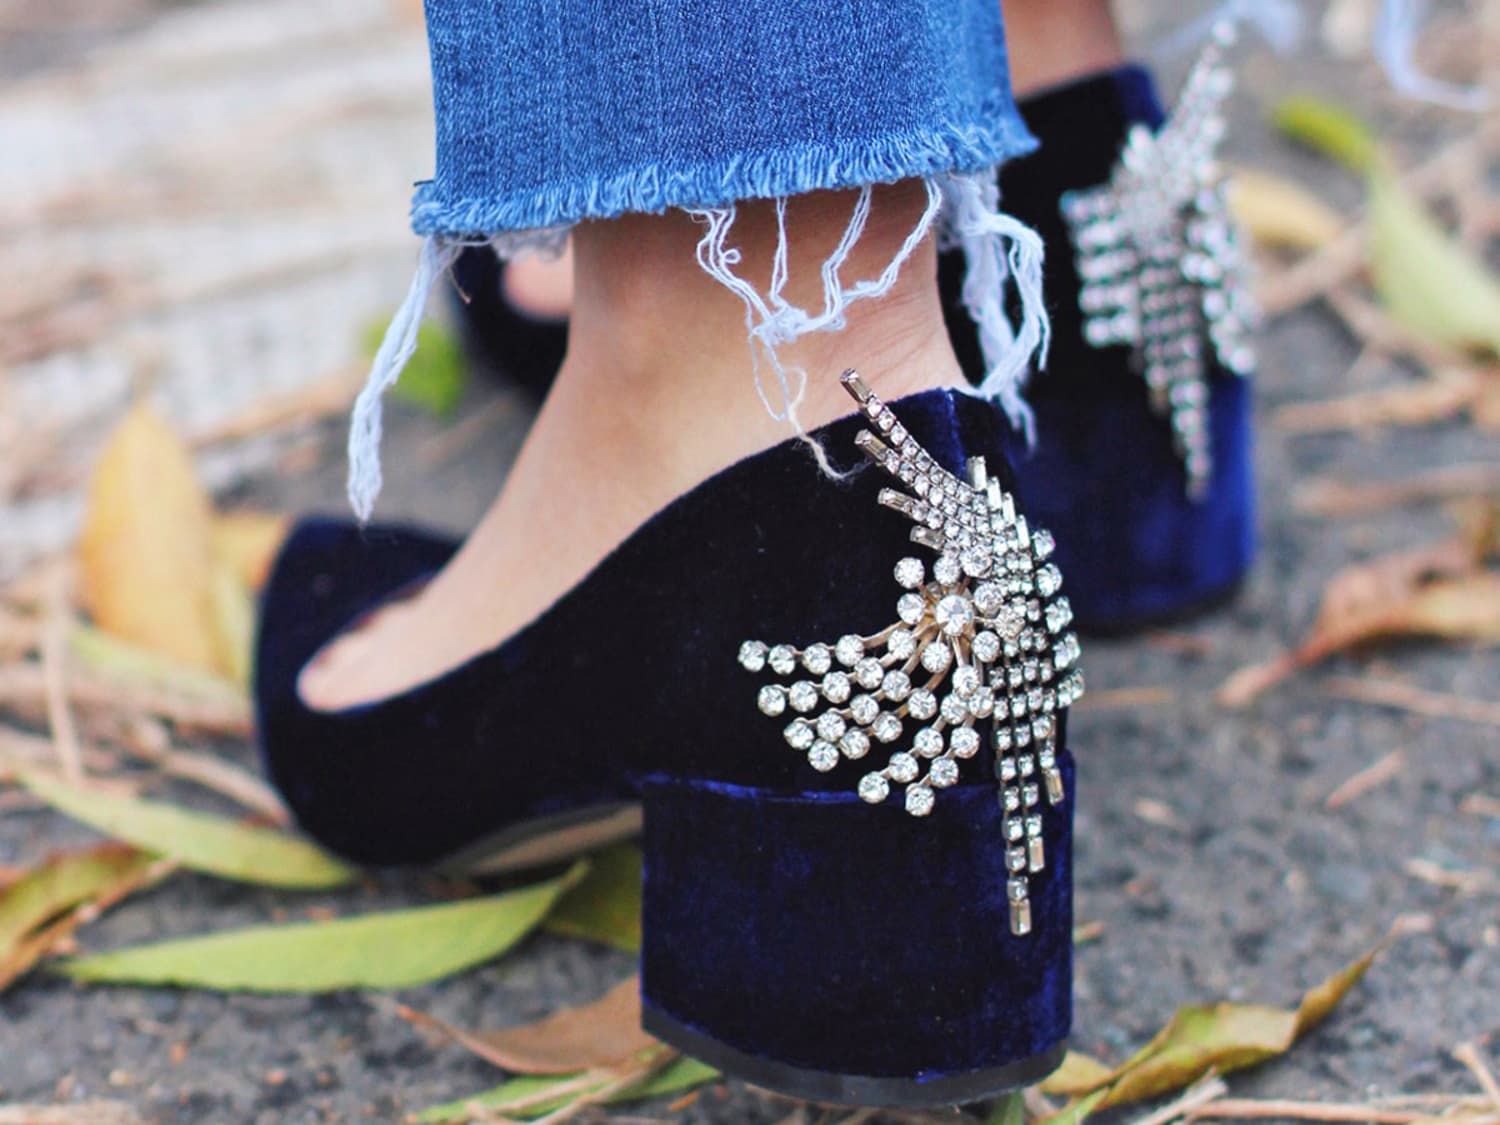 Pimp your high heels on a budget with Shoe Clips, EASY DIY